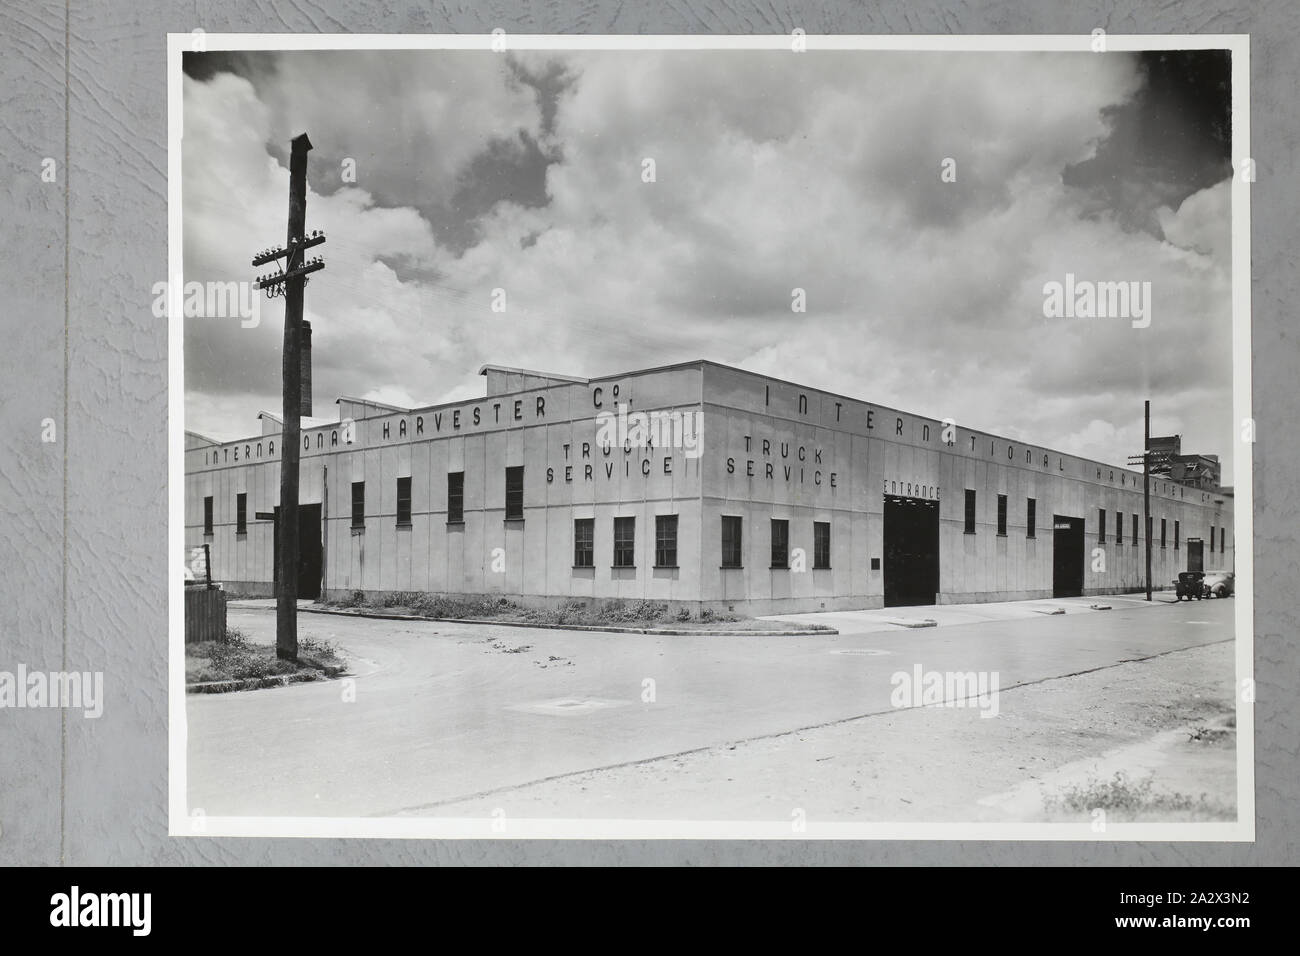 Photograph - International Harvester, Truck Service Workshop Exterior, Brisbane, 09 Jan 1947, One of four black and white photographs attached to an album page. The page is one of 28 that previously made up a photograph album containing black & white photographs of the International Harvester Company's state branch offices and showrooms throughout Australia. Part of a large collection of glass plate and film negatives, transparencies, photo albums, product catalogues, videos Stock Photo